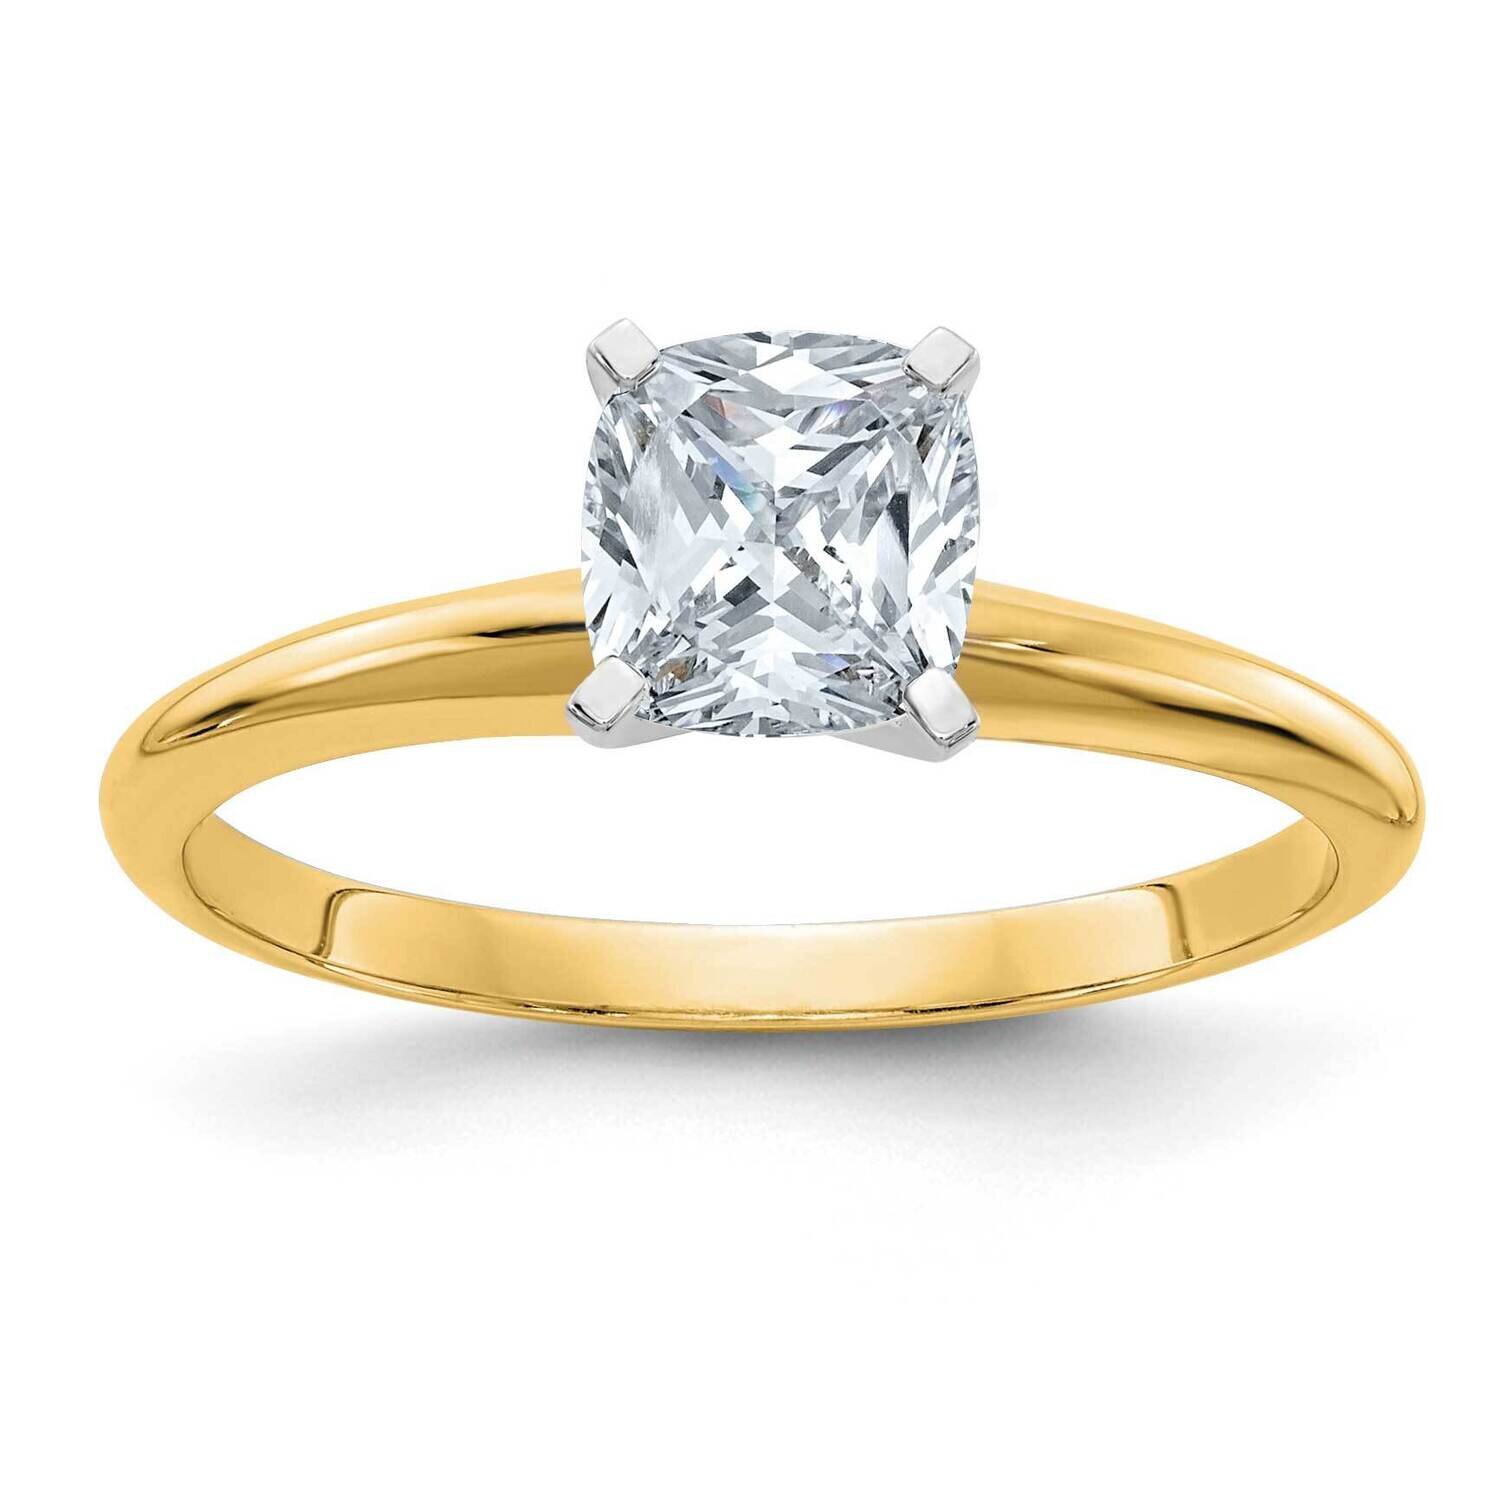 1ct. D E F Pure Light Cushion Moissanite Solitaire Ring 14k Gold YGSH13C-12MP-7